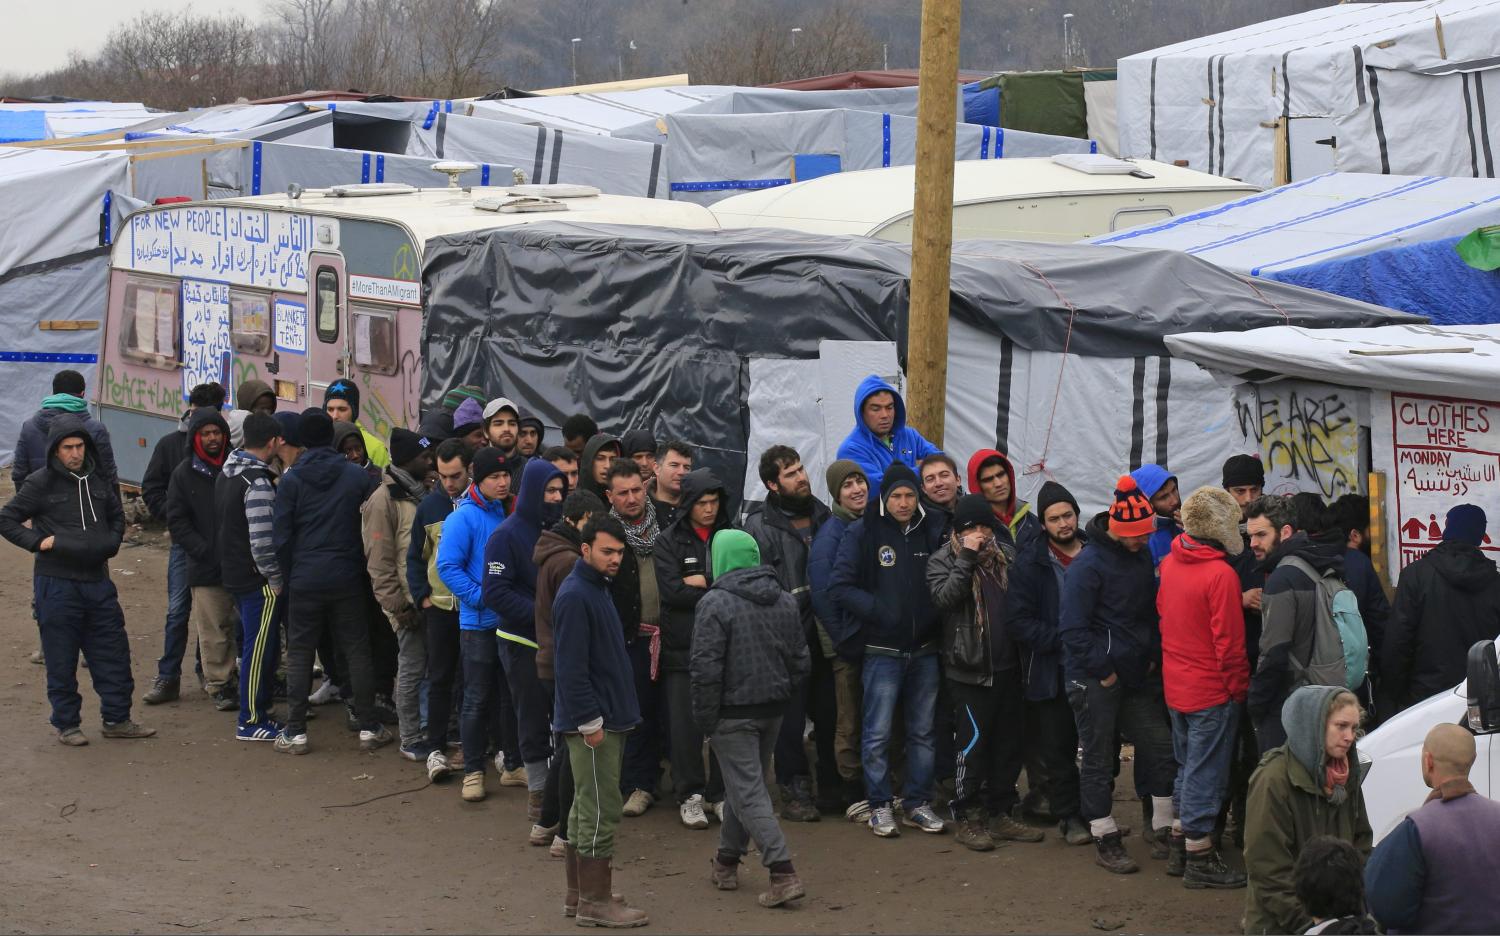 Migrants queue for clothes distribution in southern part of the camp known as the "Jungle", a squalid sprawling camp in Calais, northern France, February 26, 2016. A French judge on Thursday upheld a government plan to partially demolish a shanty town for migrants trying to reach Britain on the outskirts of the northern port of Calais, an official spokesman said. REUTERS/Pascal Rossignol - RTX28PYI